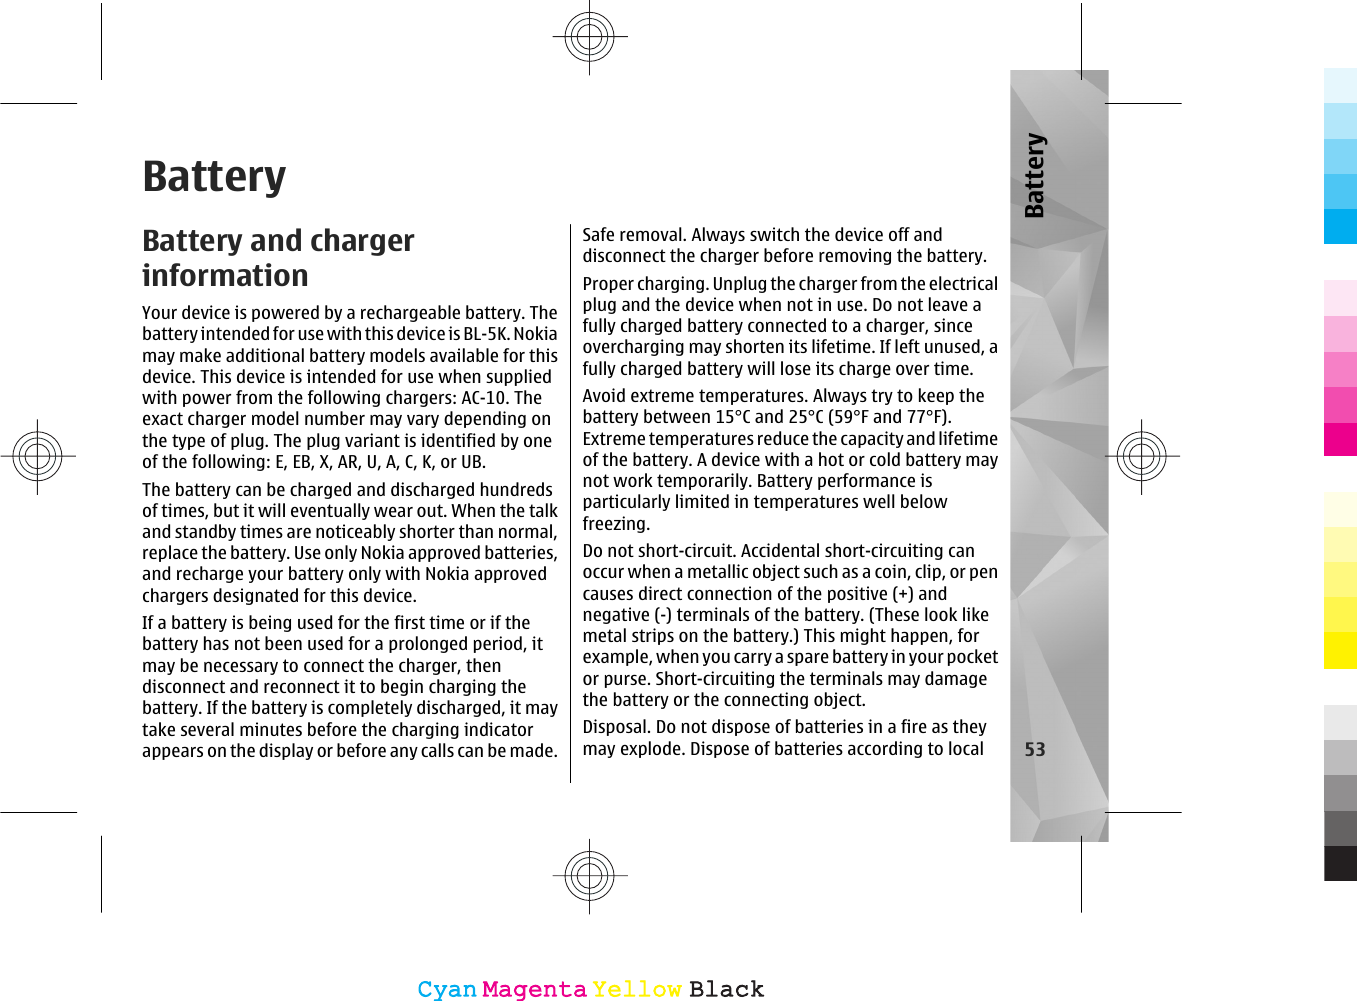 BatteryBattery and chargerinformationYour device is powered by a rechargeable battery. Thebattery intended for use with this device is BL-5K. Nokiamay make additional battery models available for thisdevice. This device is intended for use when suppliedwith power from the following chargers: AC-10. Theexact charger model number may vary depending onthe type of plug. The plug variant is identified by oneof the following: E, EB, X, AR, U, A, C, K, or UB.The battery can be charged and discharged hundredsof times, but it will eventually wear out. When the talkand standby times are noticeably shorter than normal,replace the battery. Use only Nokia approved batteries,and recharge your battery only with Nokia approvedchargers designated for this device.If a battery is being used for the first time or if thebattery has not been used for a prolonged period, itmay be necessary to connect the charger, thendisconnect and reconnect it to begin charging thebattery. If the battery is completely discharged, it maytake several minutes before the charging indicatorappears on the display or before any calls can be made.Safe removal. Always switch the device off anddisconnect the charger before removing the battery.Proper charging. Unplug the charger from the electricalplug and the device when not in use. Do not leave afully charged battery connected to a charger, sinceovercharging may shorten its lifetime. If left unused, afully charged battery will lose its charge over time.Avoid extreme temperatures. Always try to keep thebattery between 15°C and 25°C (59°F and 77°F).Extreme temperatures reduce the capacity and lifetimeof the battery. A device with a hot or cold battery maynot work temporarily. Battery performance isparticularly limited in temperatures well belowfreezing.Do not short-circuit. Accidental short-circuiting canoccur when a metallic object such as a coin, clip, or pencauses direct connection of the positive (+) andnegative (-) terminals of the battery. (These look likemetal strips on the battery.) This might happen, forexample, when you carry a spare battery in your pocketor purse. Short-circuiting the terminals may damagethe battery or the connecting object.Disposal. Do not dispose of batteries in a fire as theymay explode. Dispose of batteries according to local 53BatteryCyanCyanMagentaMagentaYellowYellowBlackBlack